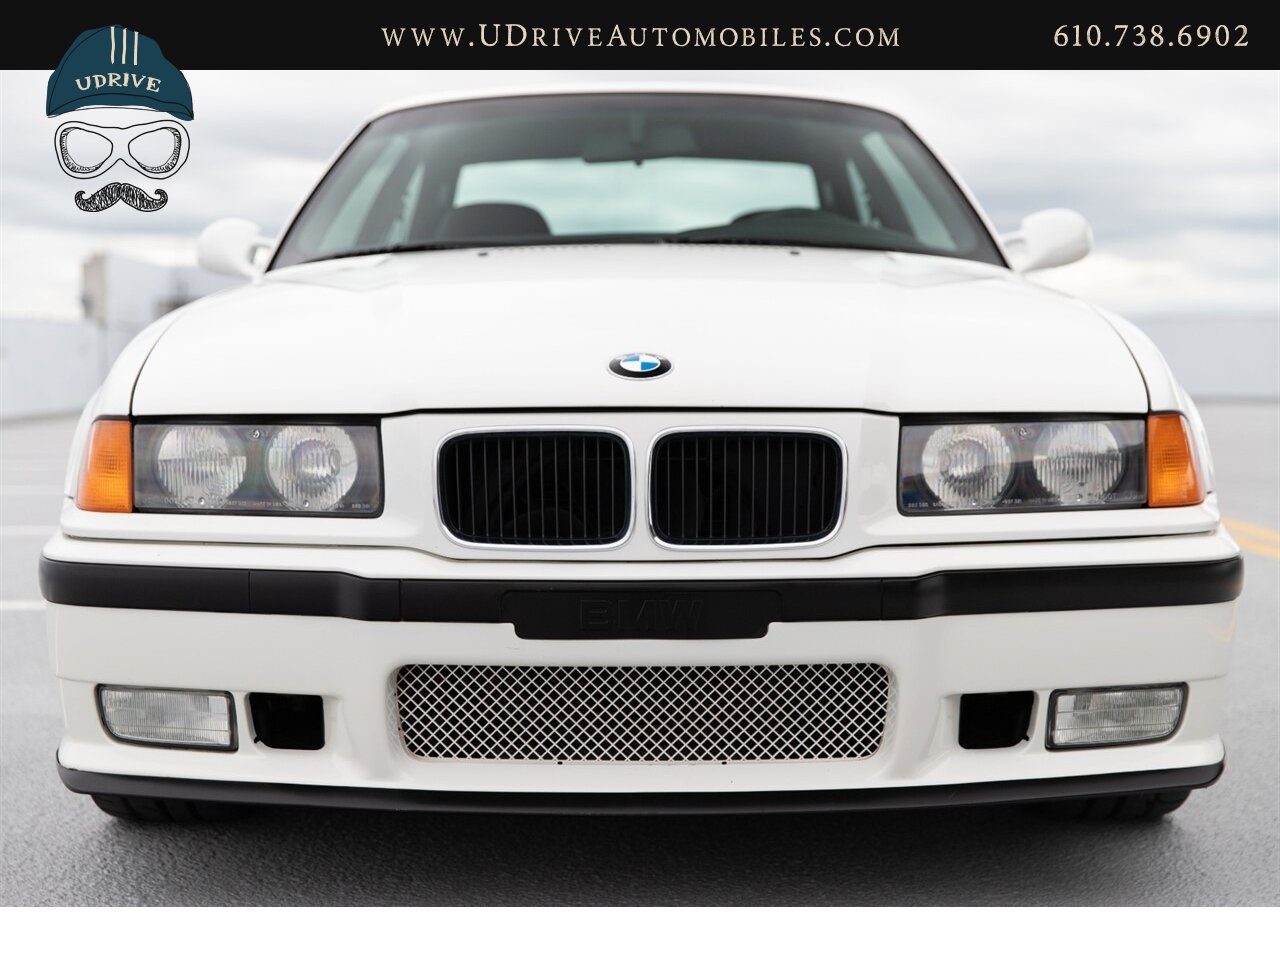 1995 BMW M3 E36 Alpine White over Black Vader Seats  5 Speed - Photo 11 - West Chester, PA 19382